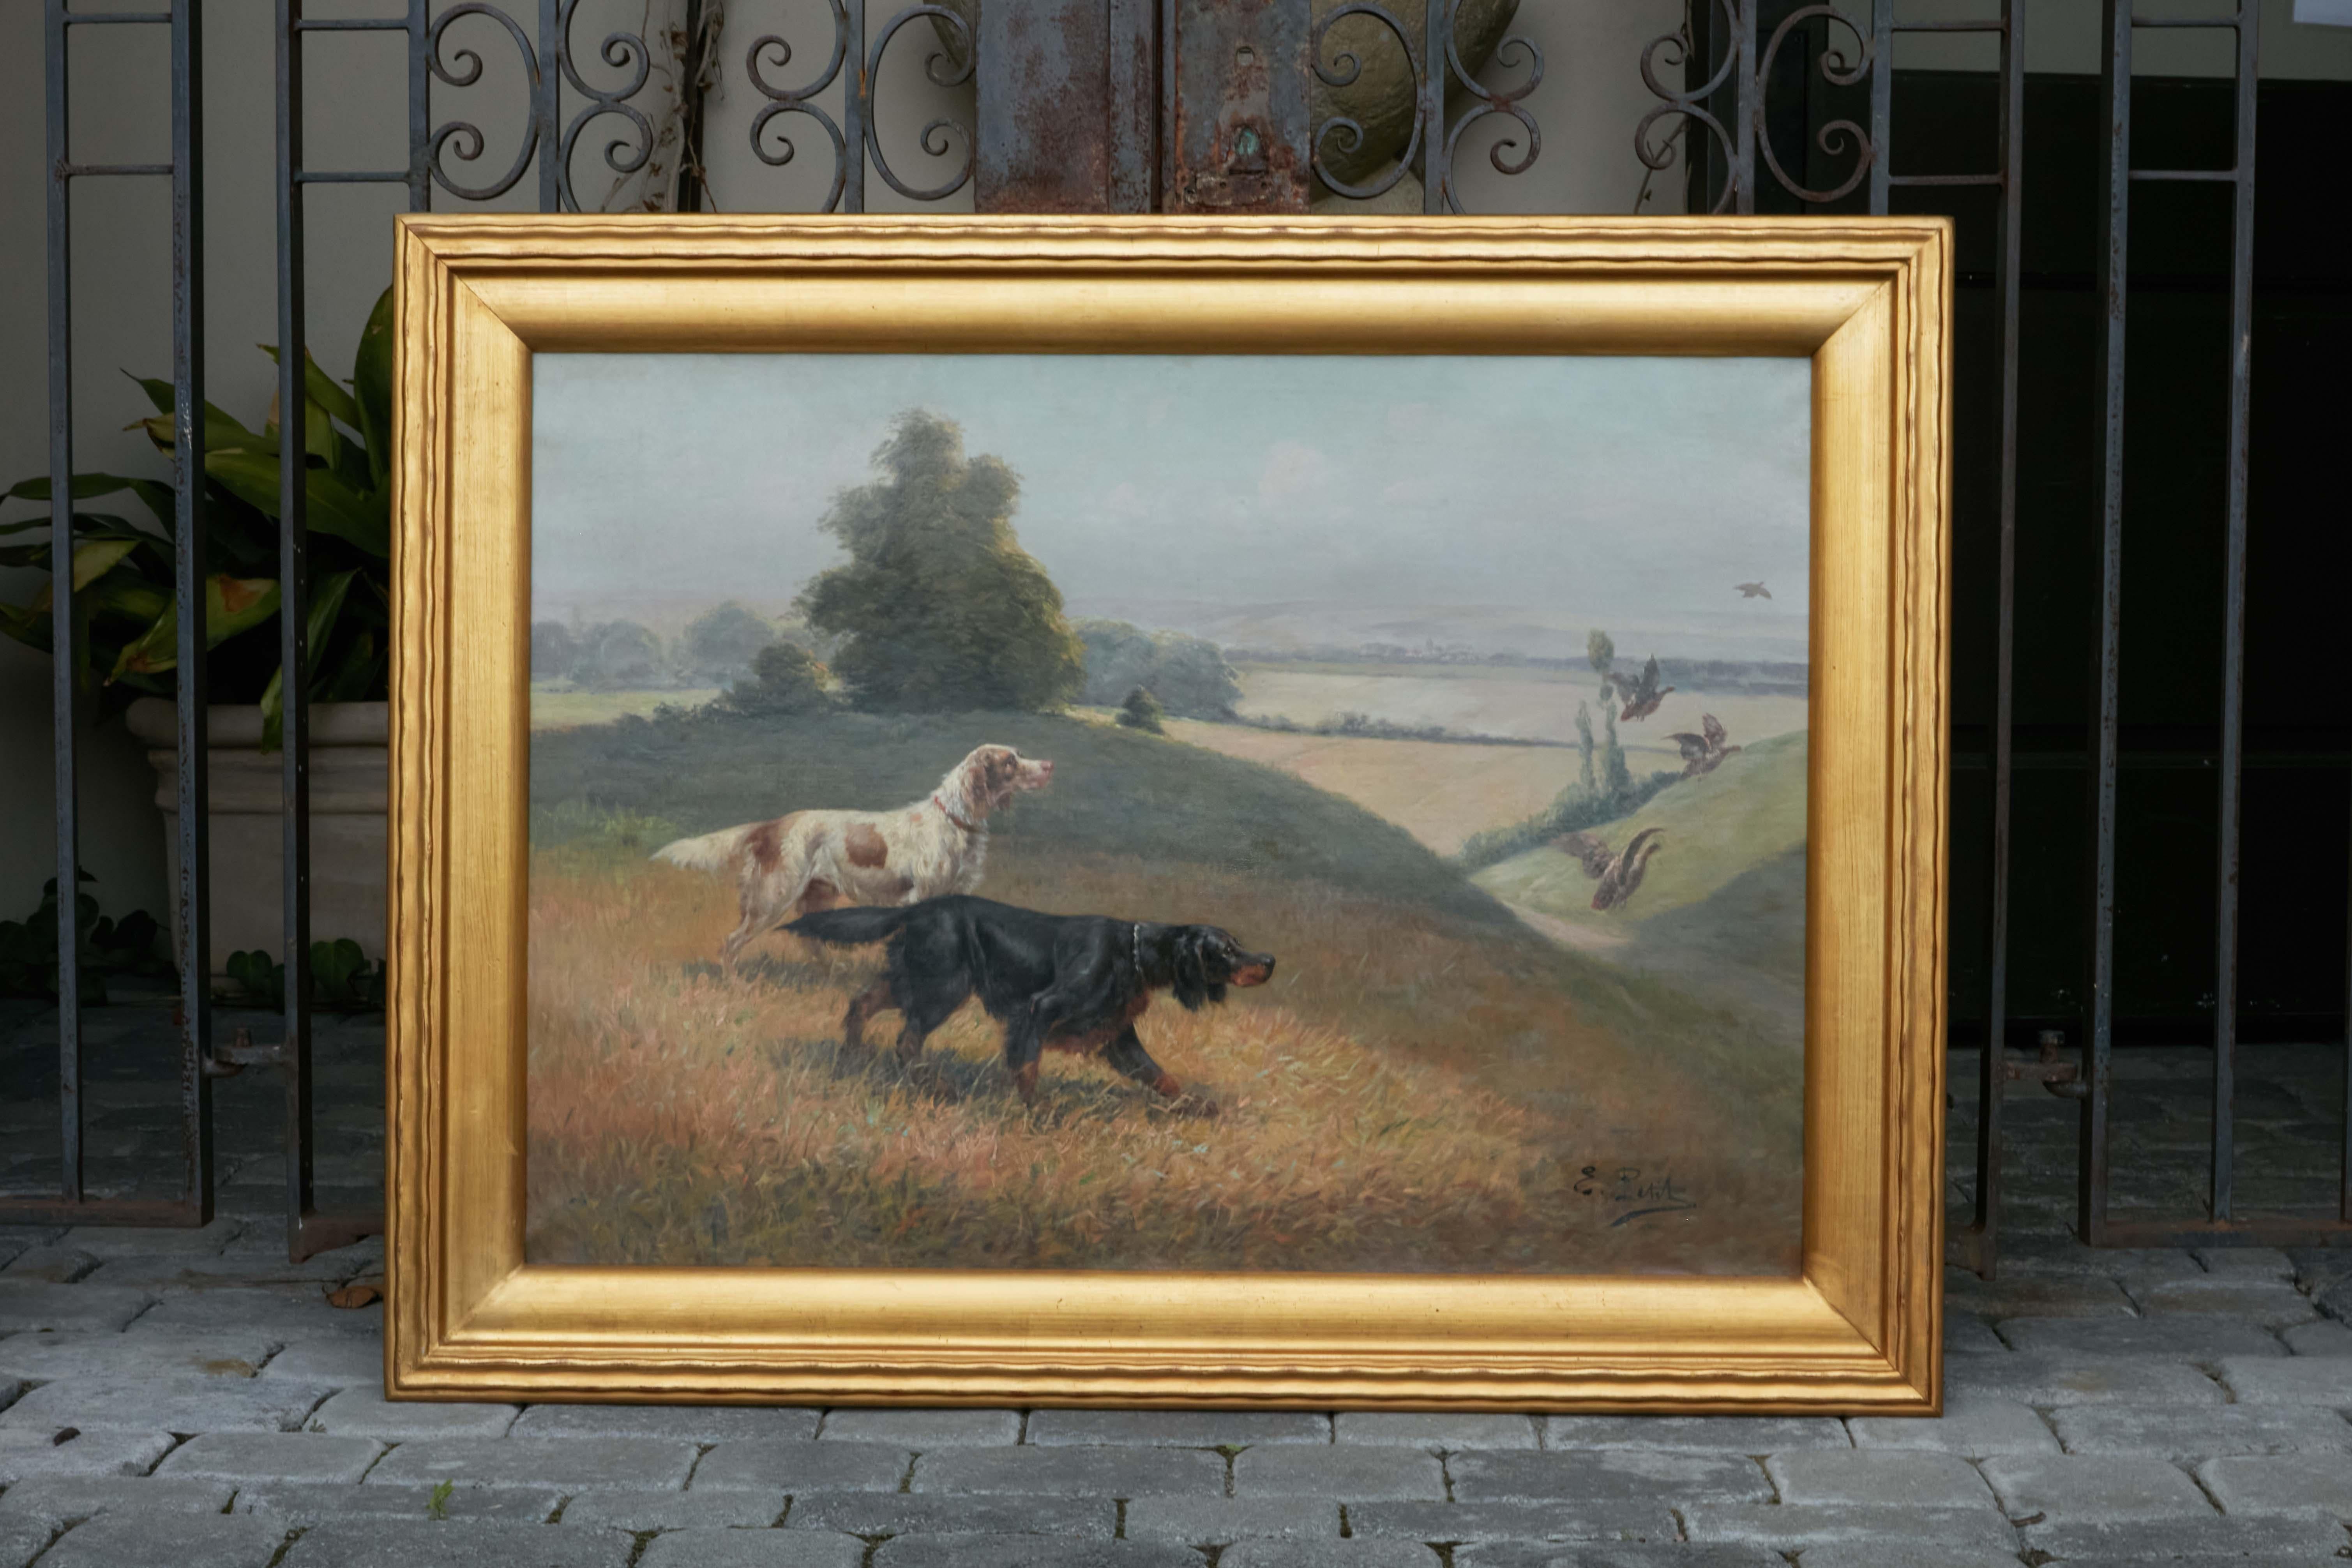 A French oil on canvas painting by Eugène Petit from the 19th century depicting two sporting dogs in a landscape, hunting ducks. Created during the 19th century by French painter Eugène Petit (1839-1886), this oil on canvas painting depicts two